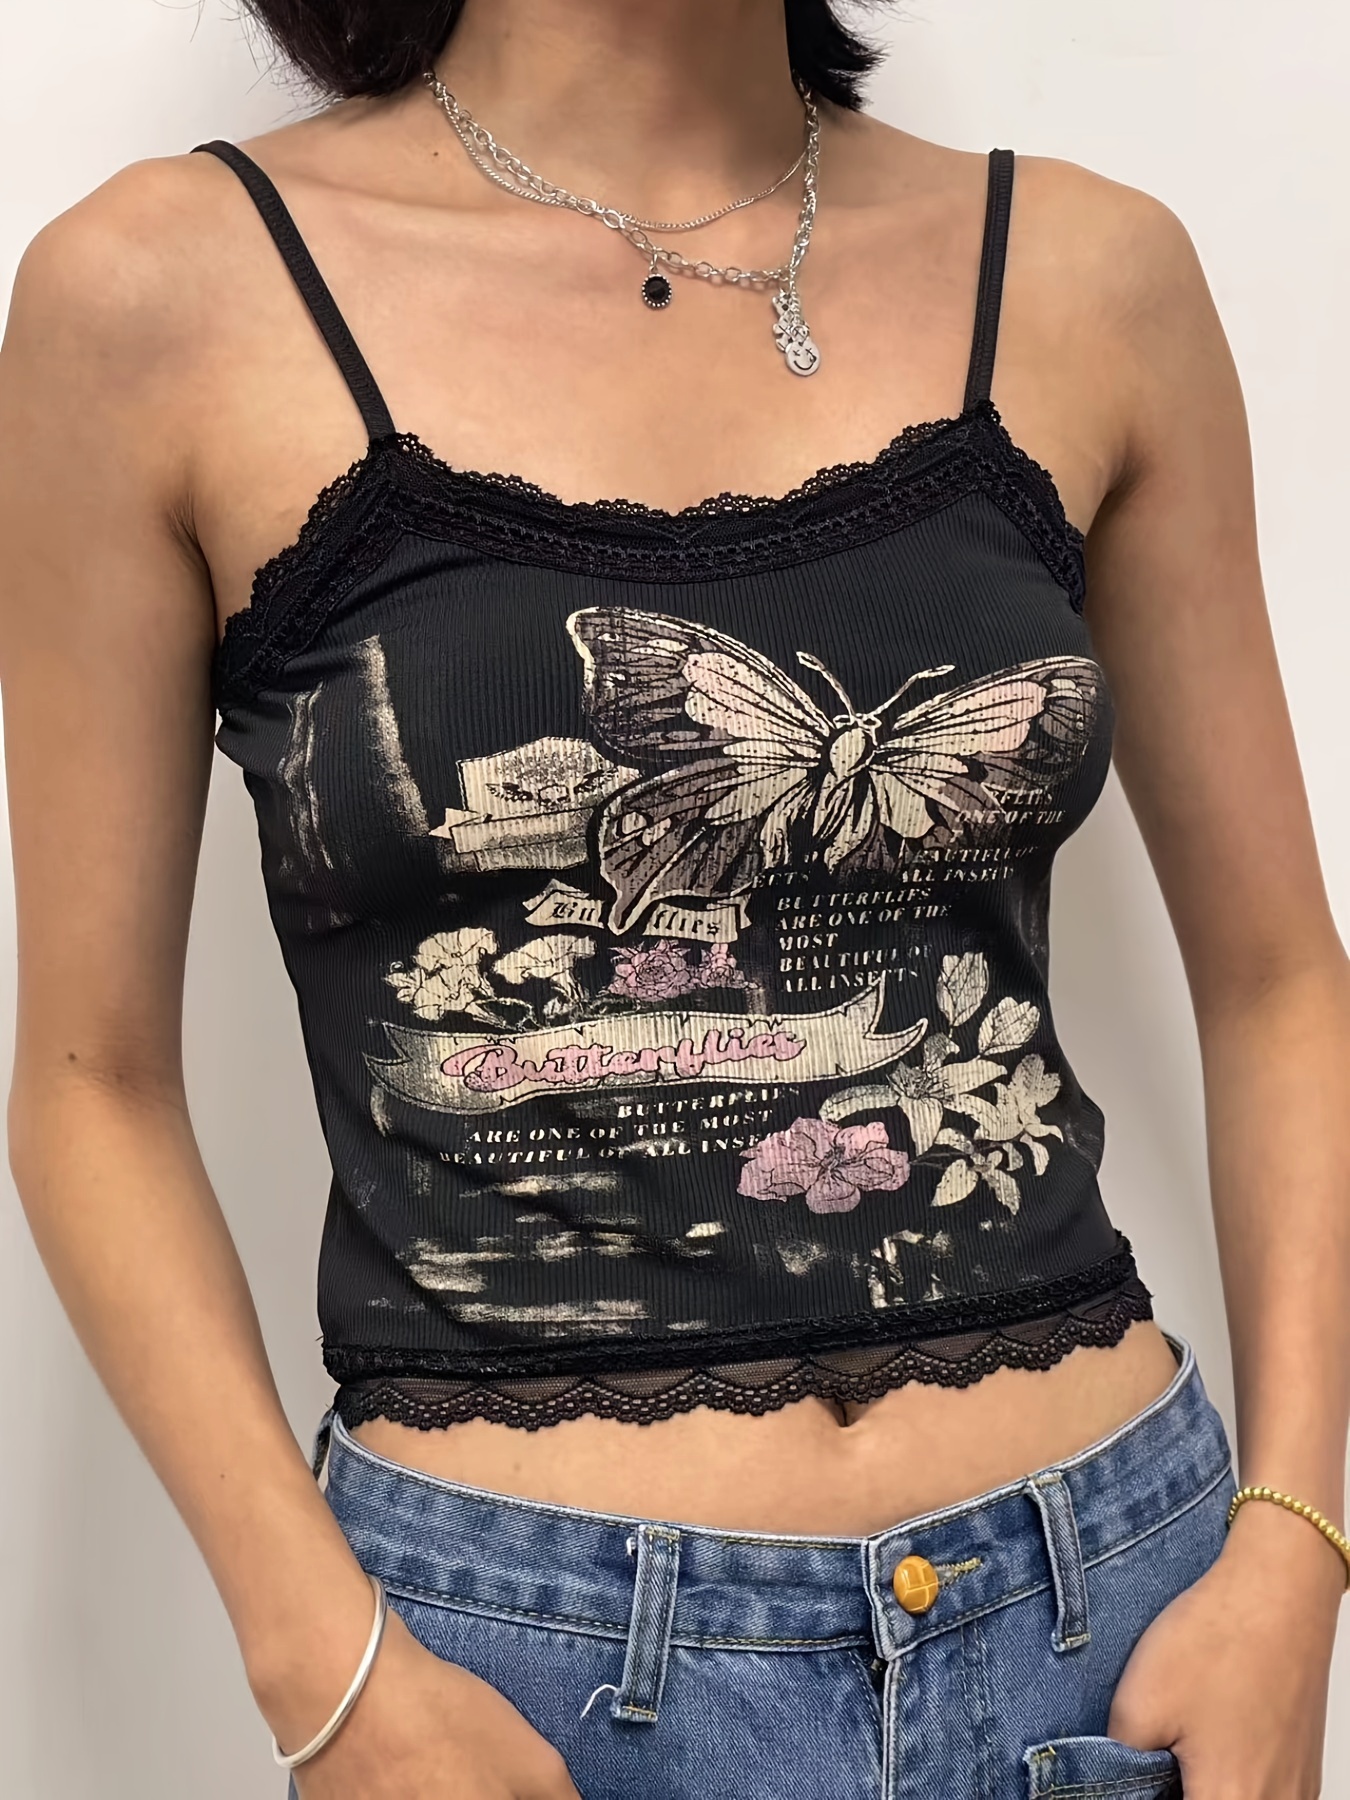 Y2K Grunge Butterfly Print Lace Trim Top, Sexy Spaghetti Sleeveless Cropped  Top, Women's Clothing